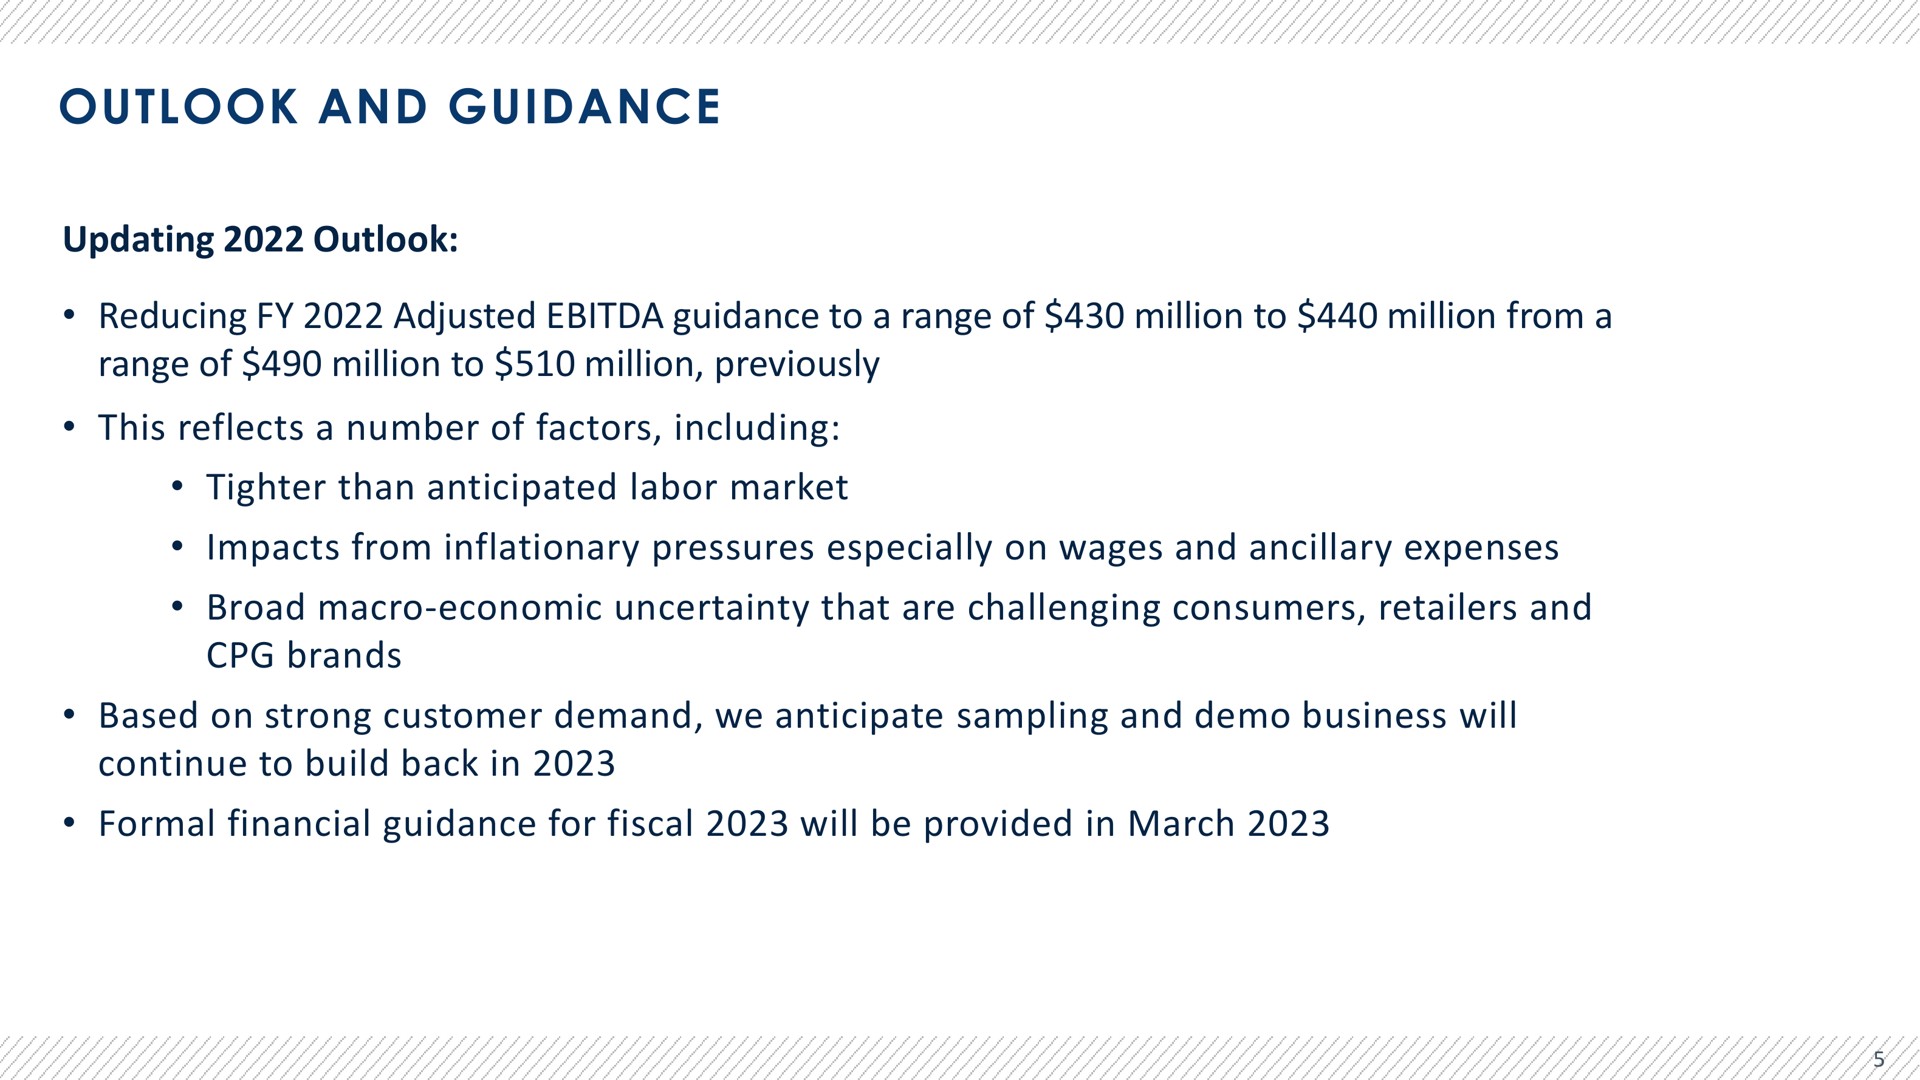 outlook and guidance updating outlook reducing adjusted guidance to a range of million to million from a range of million to million previously this reflects a number of factors including than anticipated labor market impacts from inflationary pressures especially on wages and ancillary expenses broad macro economic uncertainty that are challenging consumers retailers and brands based on strong customer demand we anticipate sampling and business will continue to build back in formal financial guidance for fiscal will be provided in march | Advantage Solutions